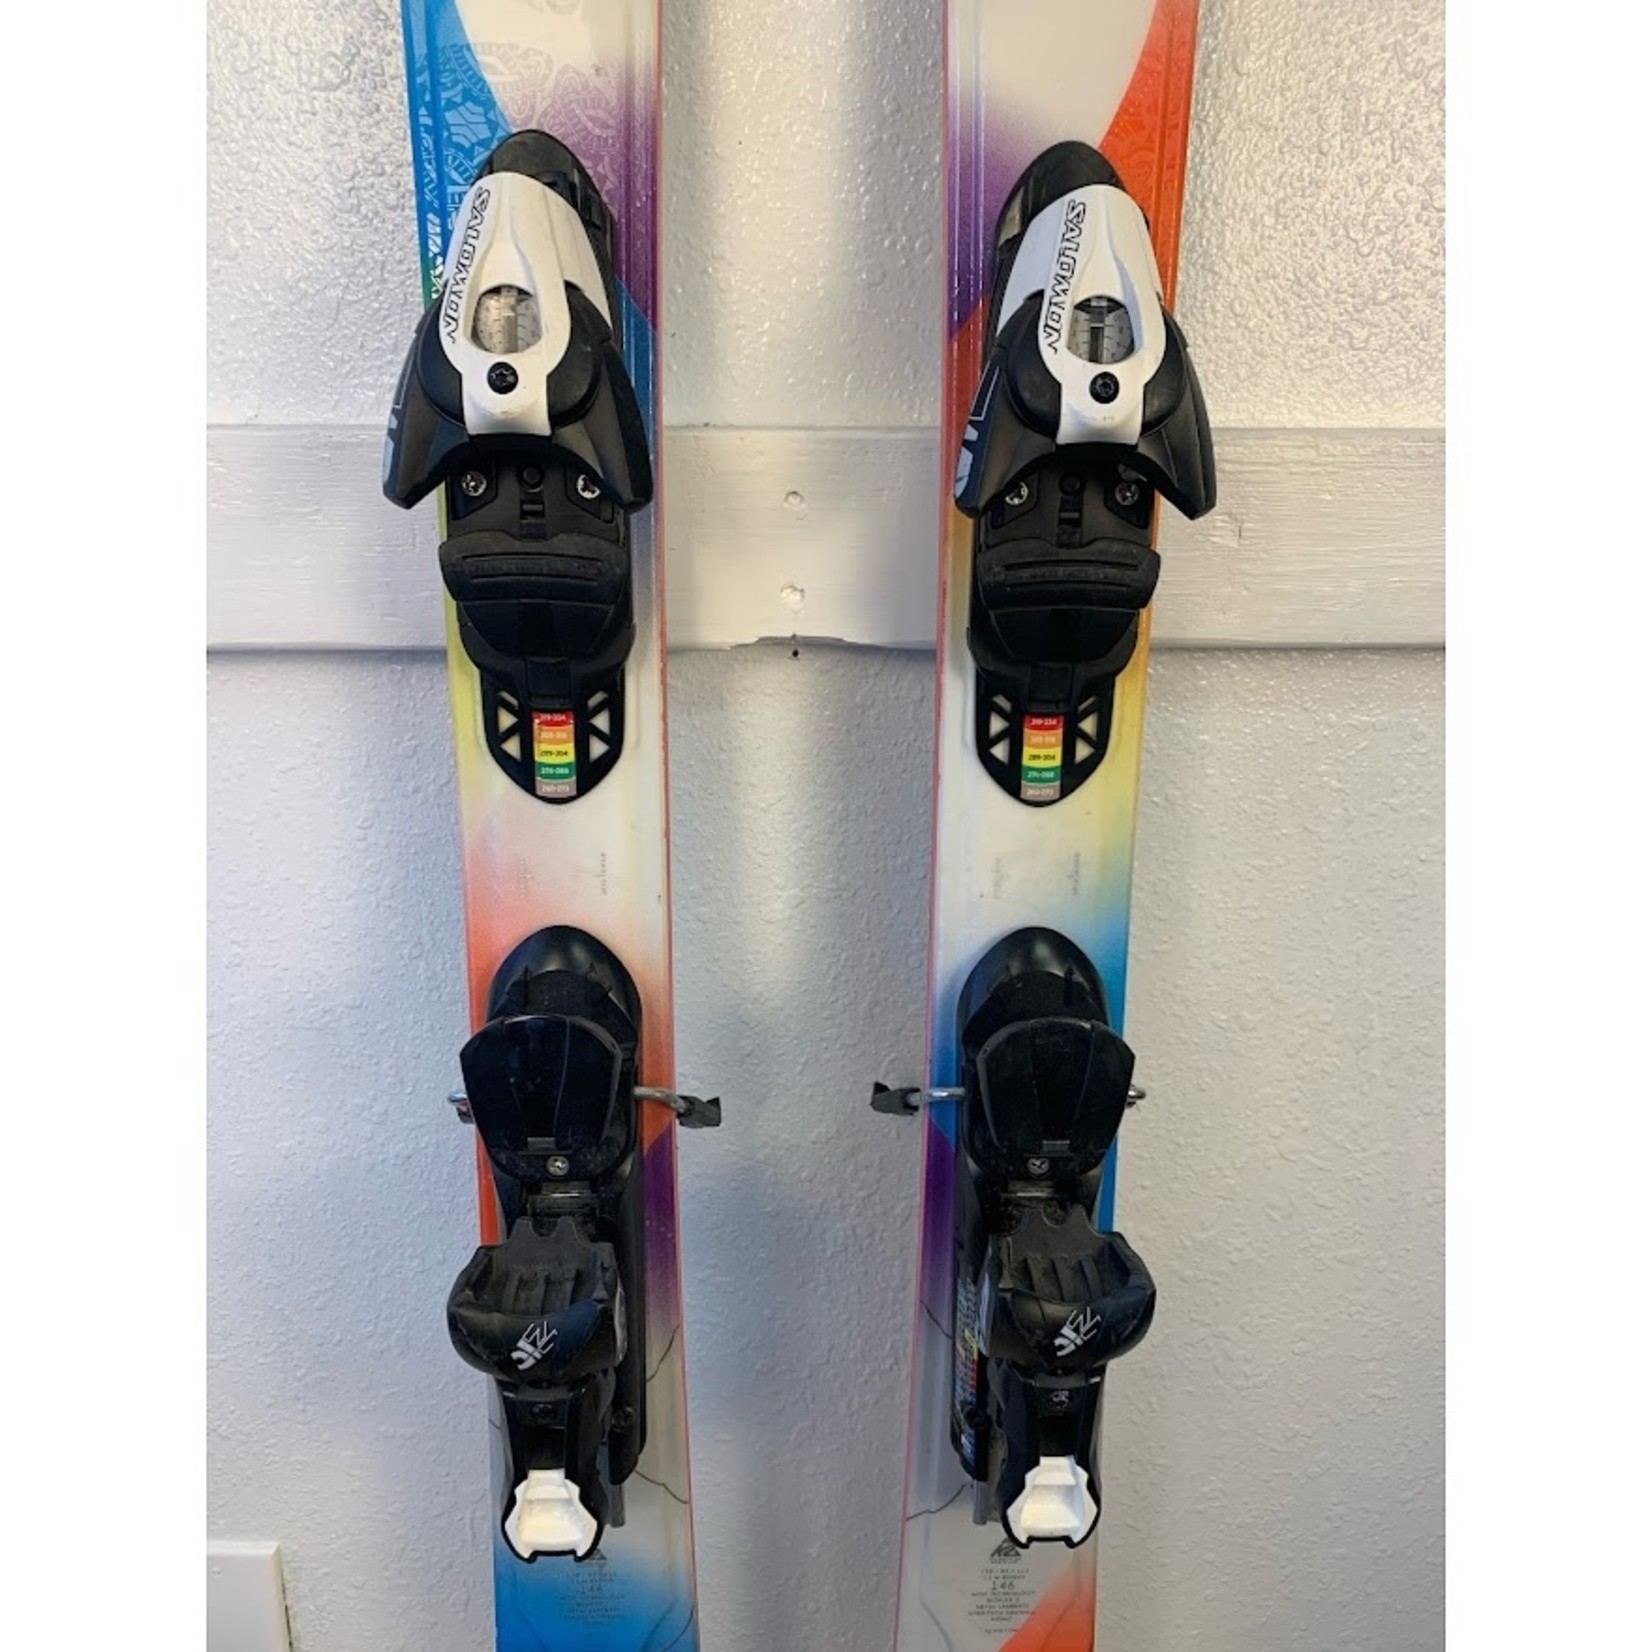 K2 K2 Superstitious Skis, Size 146 cm.